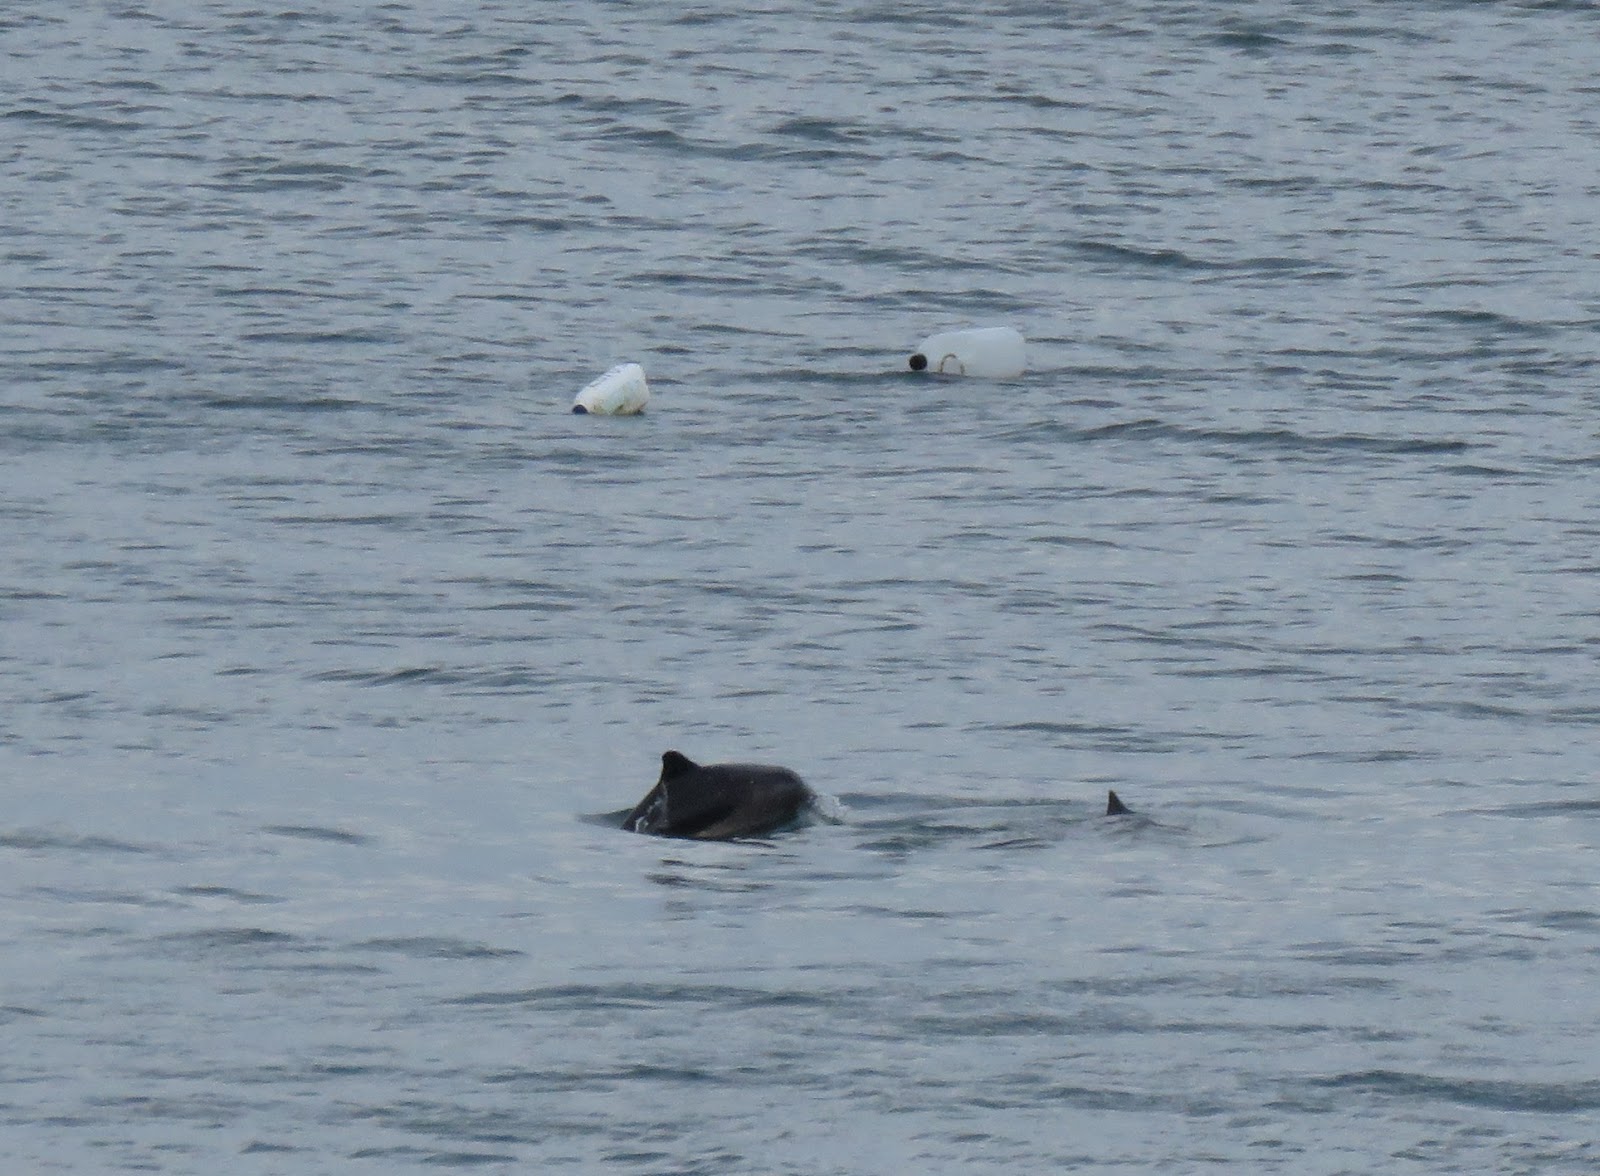 Whales in Wales: Fishguard Harbour mother and calf porpoises 10/7/16